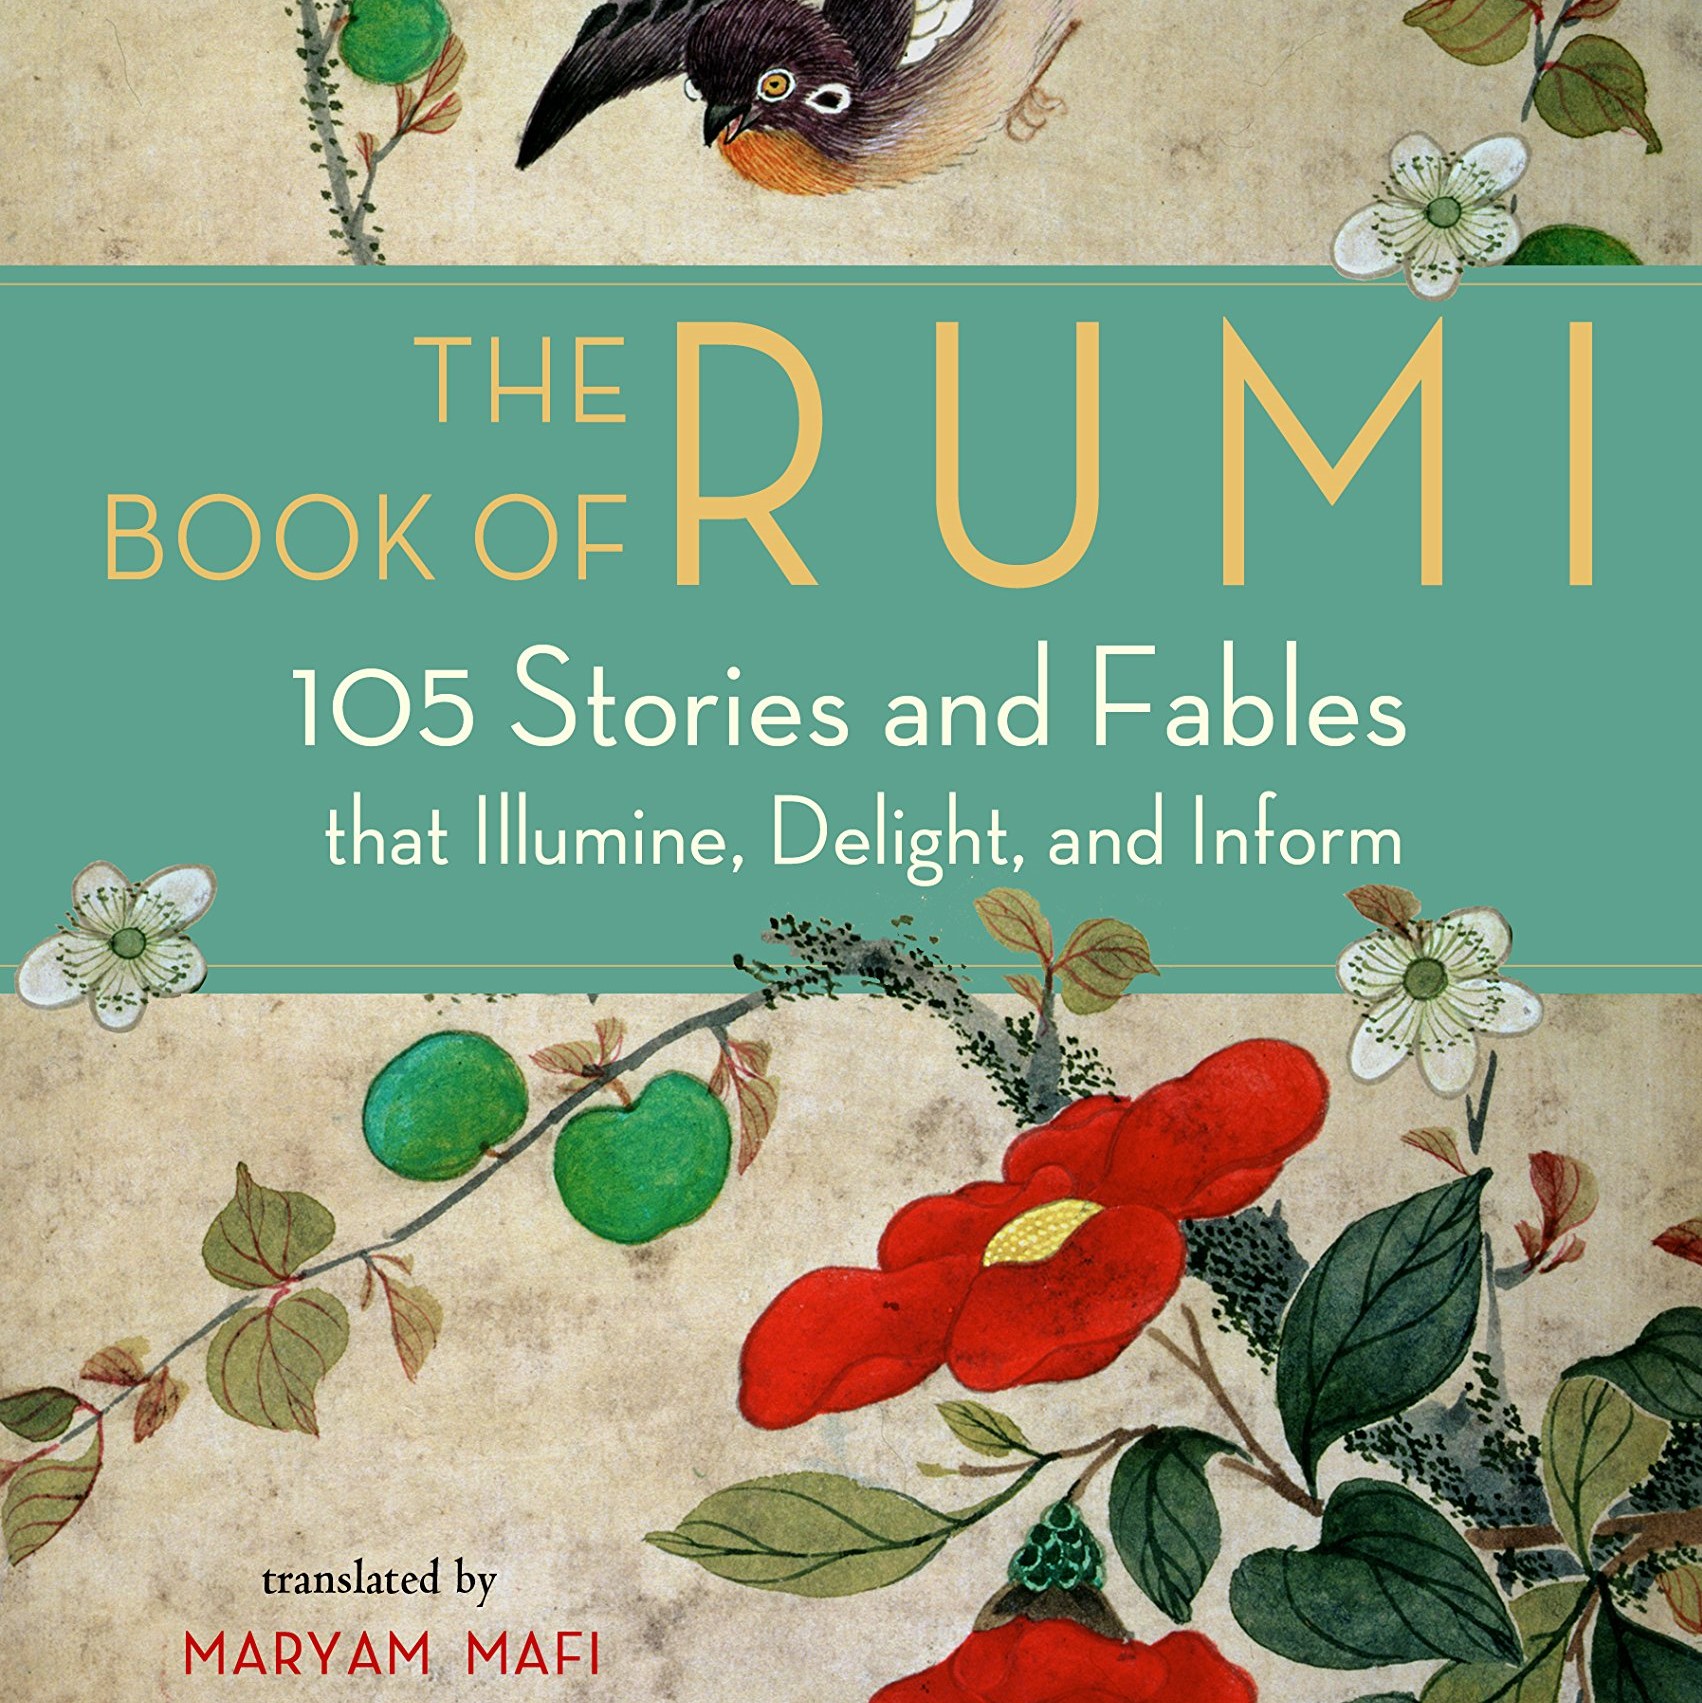 Cover image for 'The Book of Rumi: 105 Stories and Fables that Illuminate, Delight, and Inform'